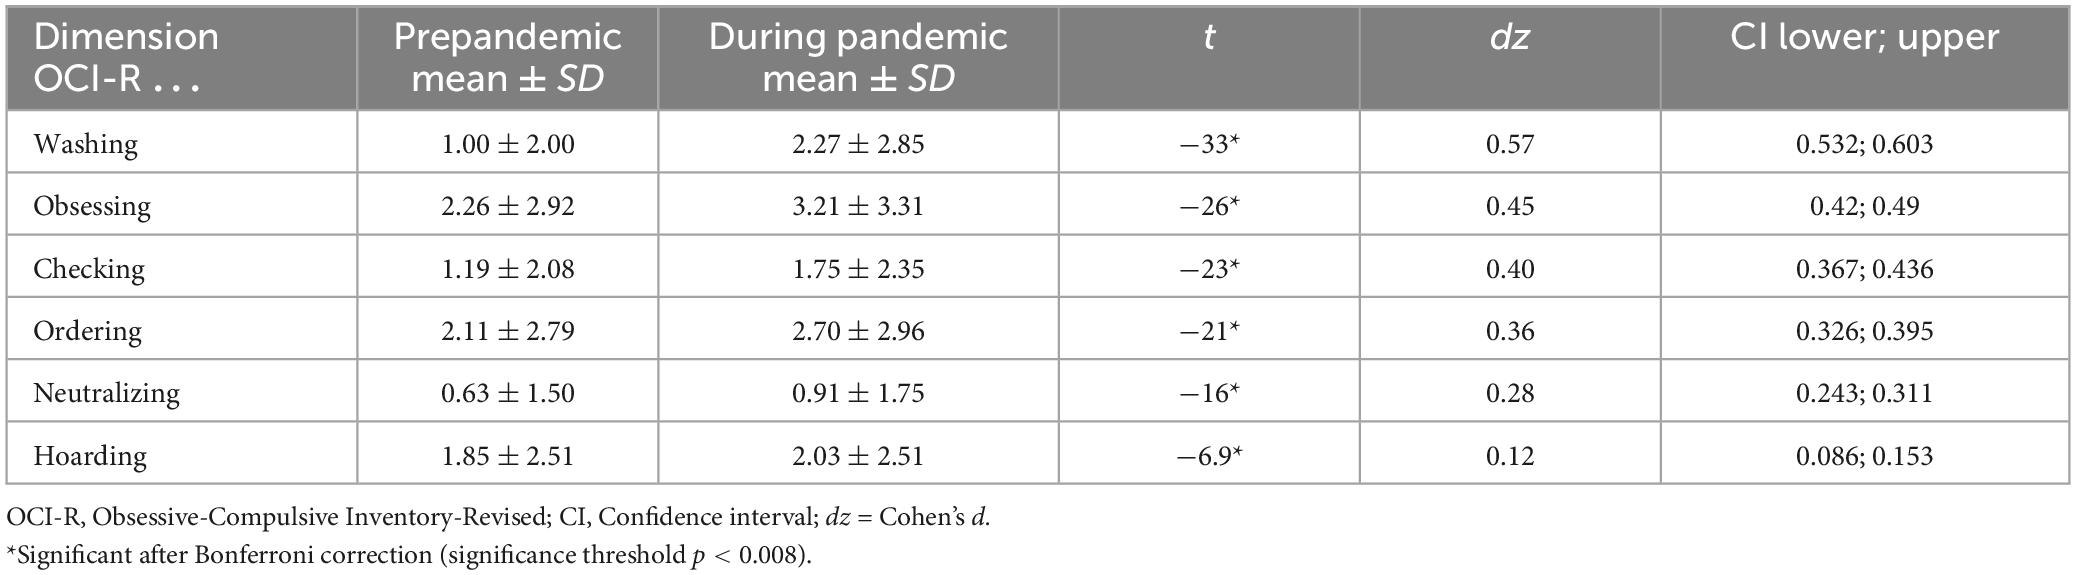 Frontiers | Impact of the COVID-19 pandemic on obsessive-compulsive ...